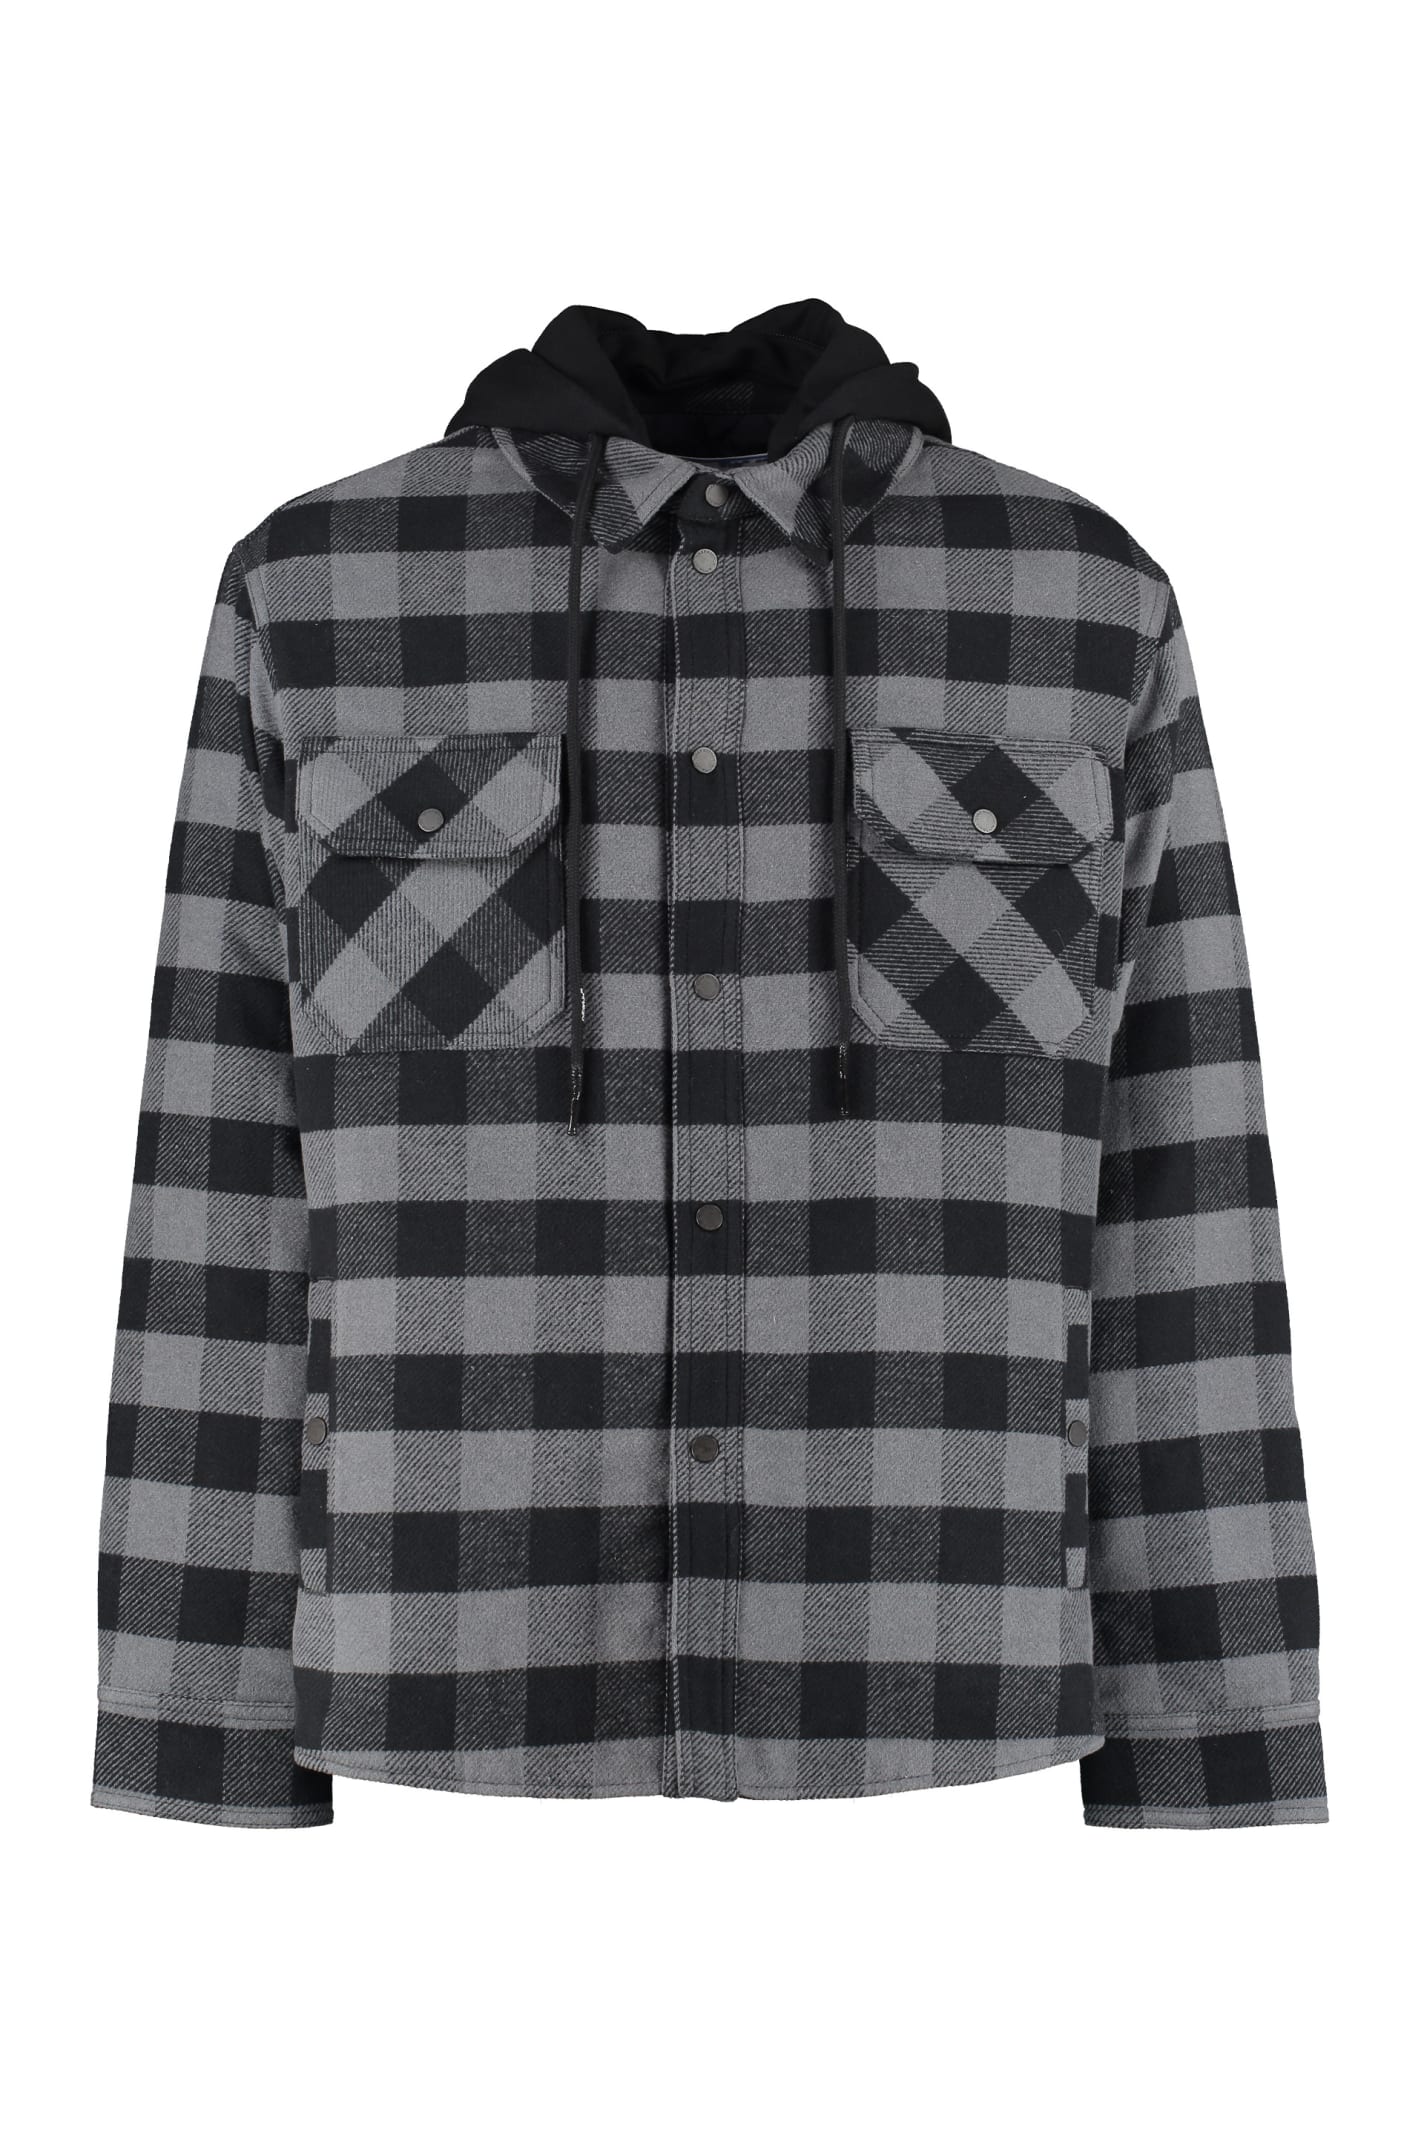 Off-White Hooded Checked Overshirt